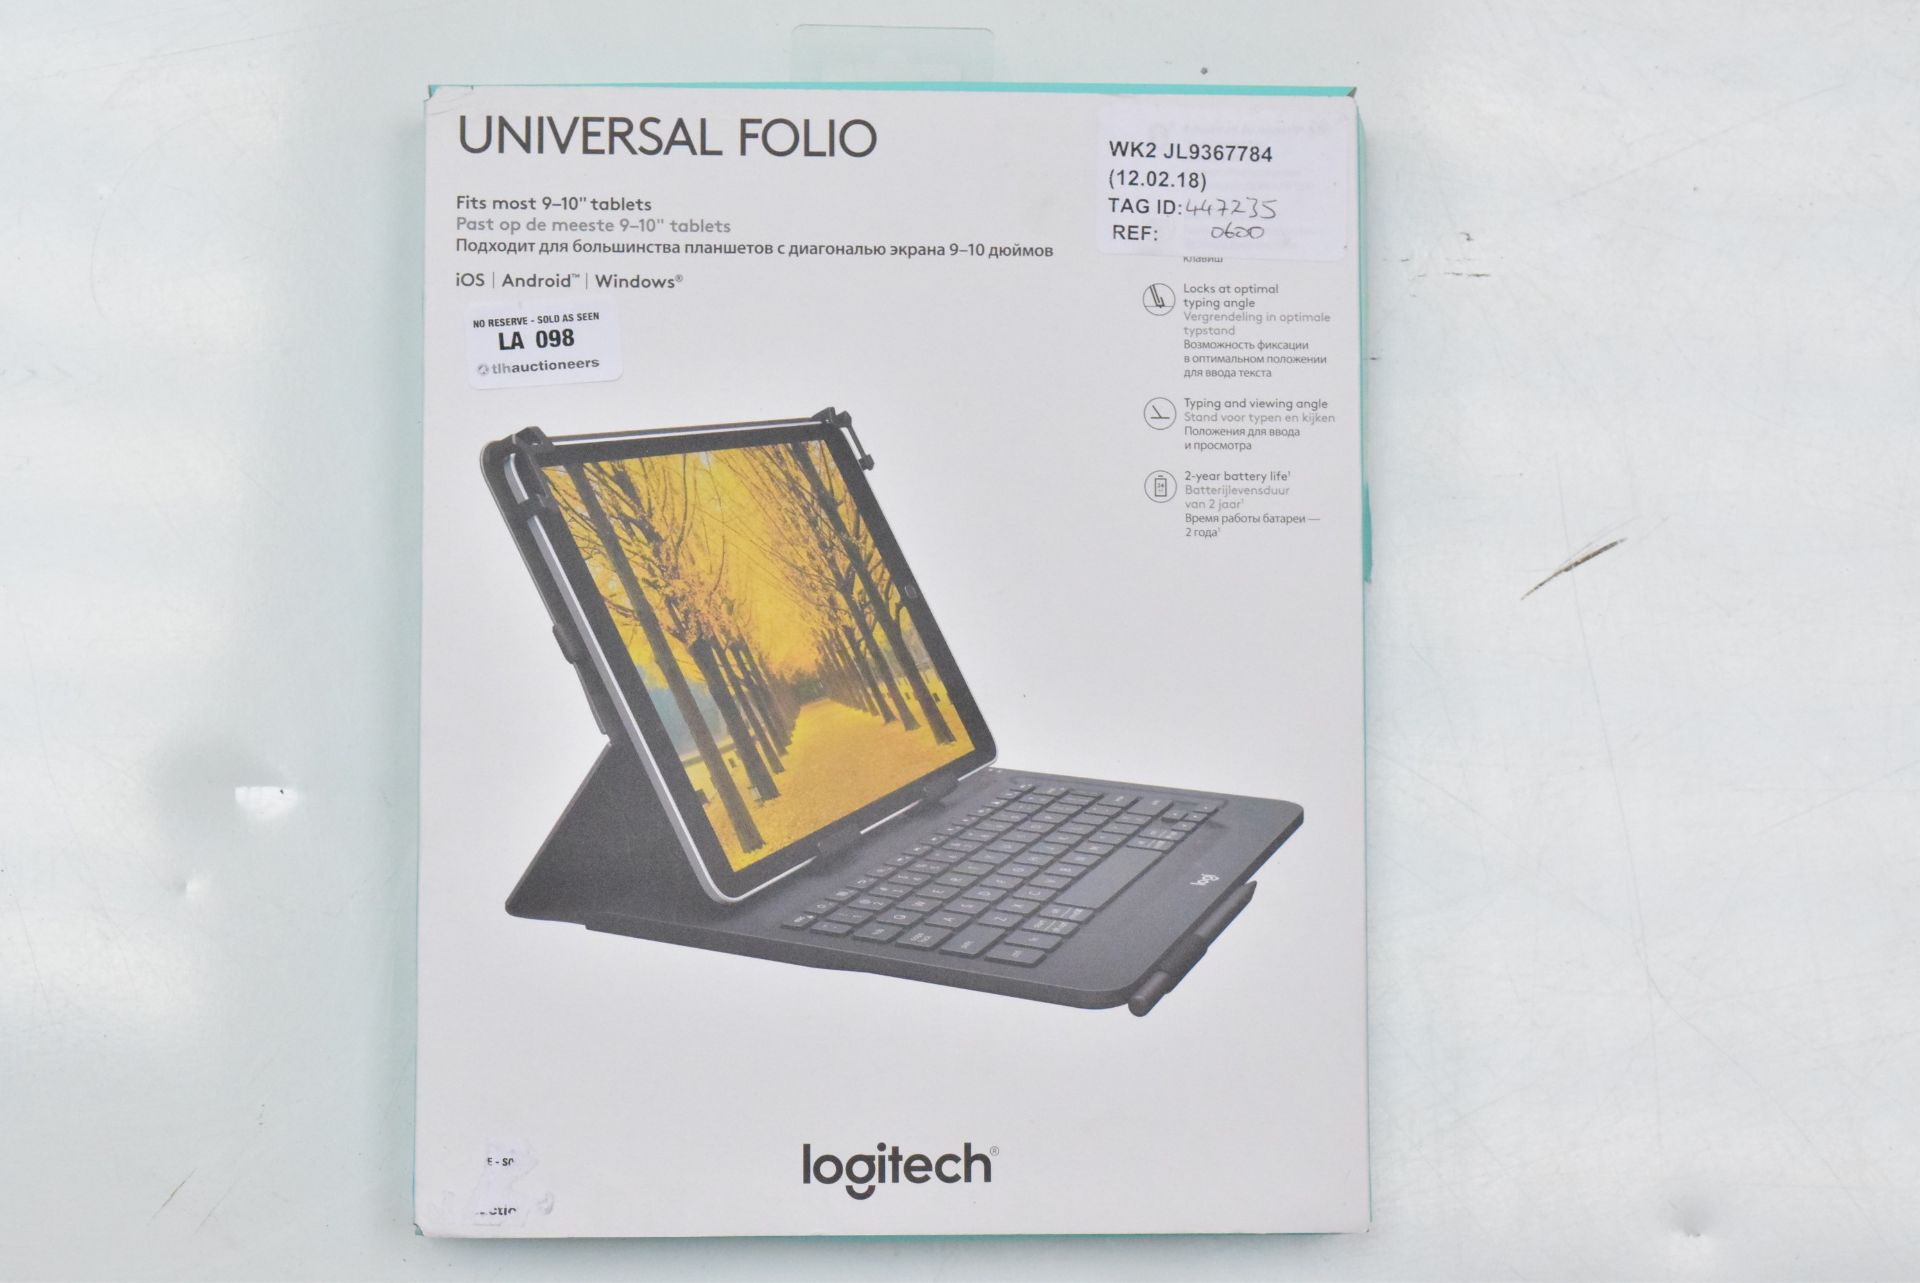 1 X BOXED LOGITECH UNIVERSAL FOLIO TO FIT 9"-10" TABLETS RRP £60 12.02.18 447235 T98